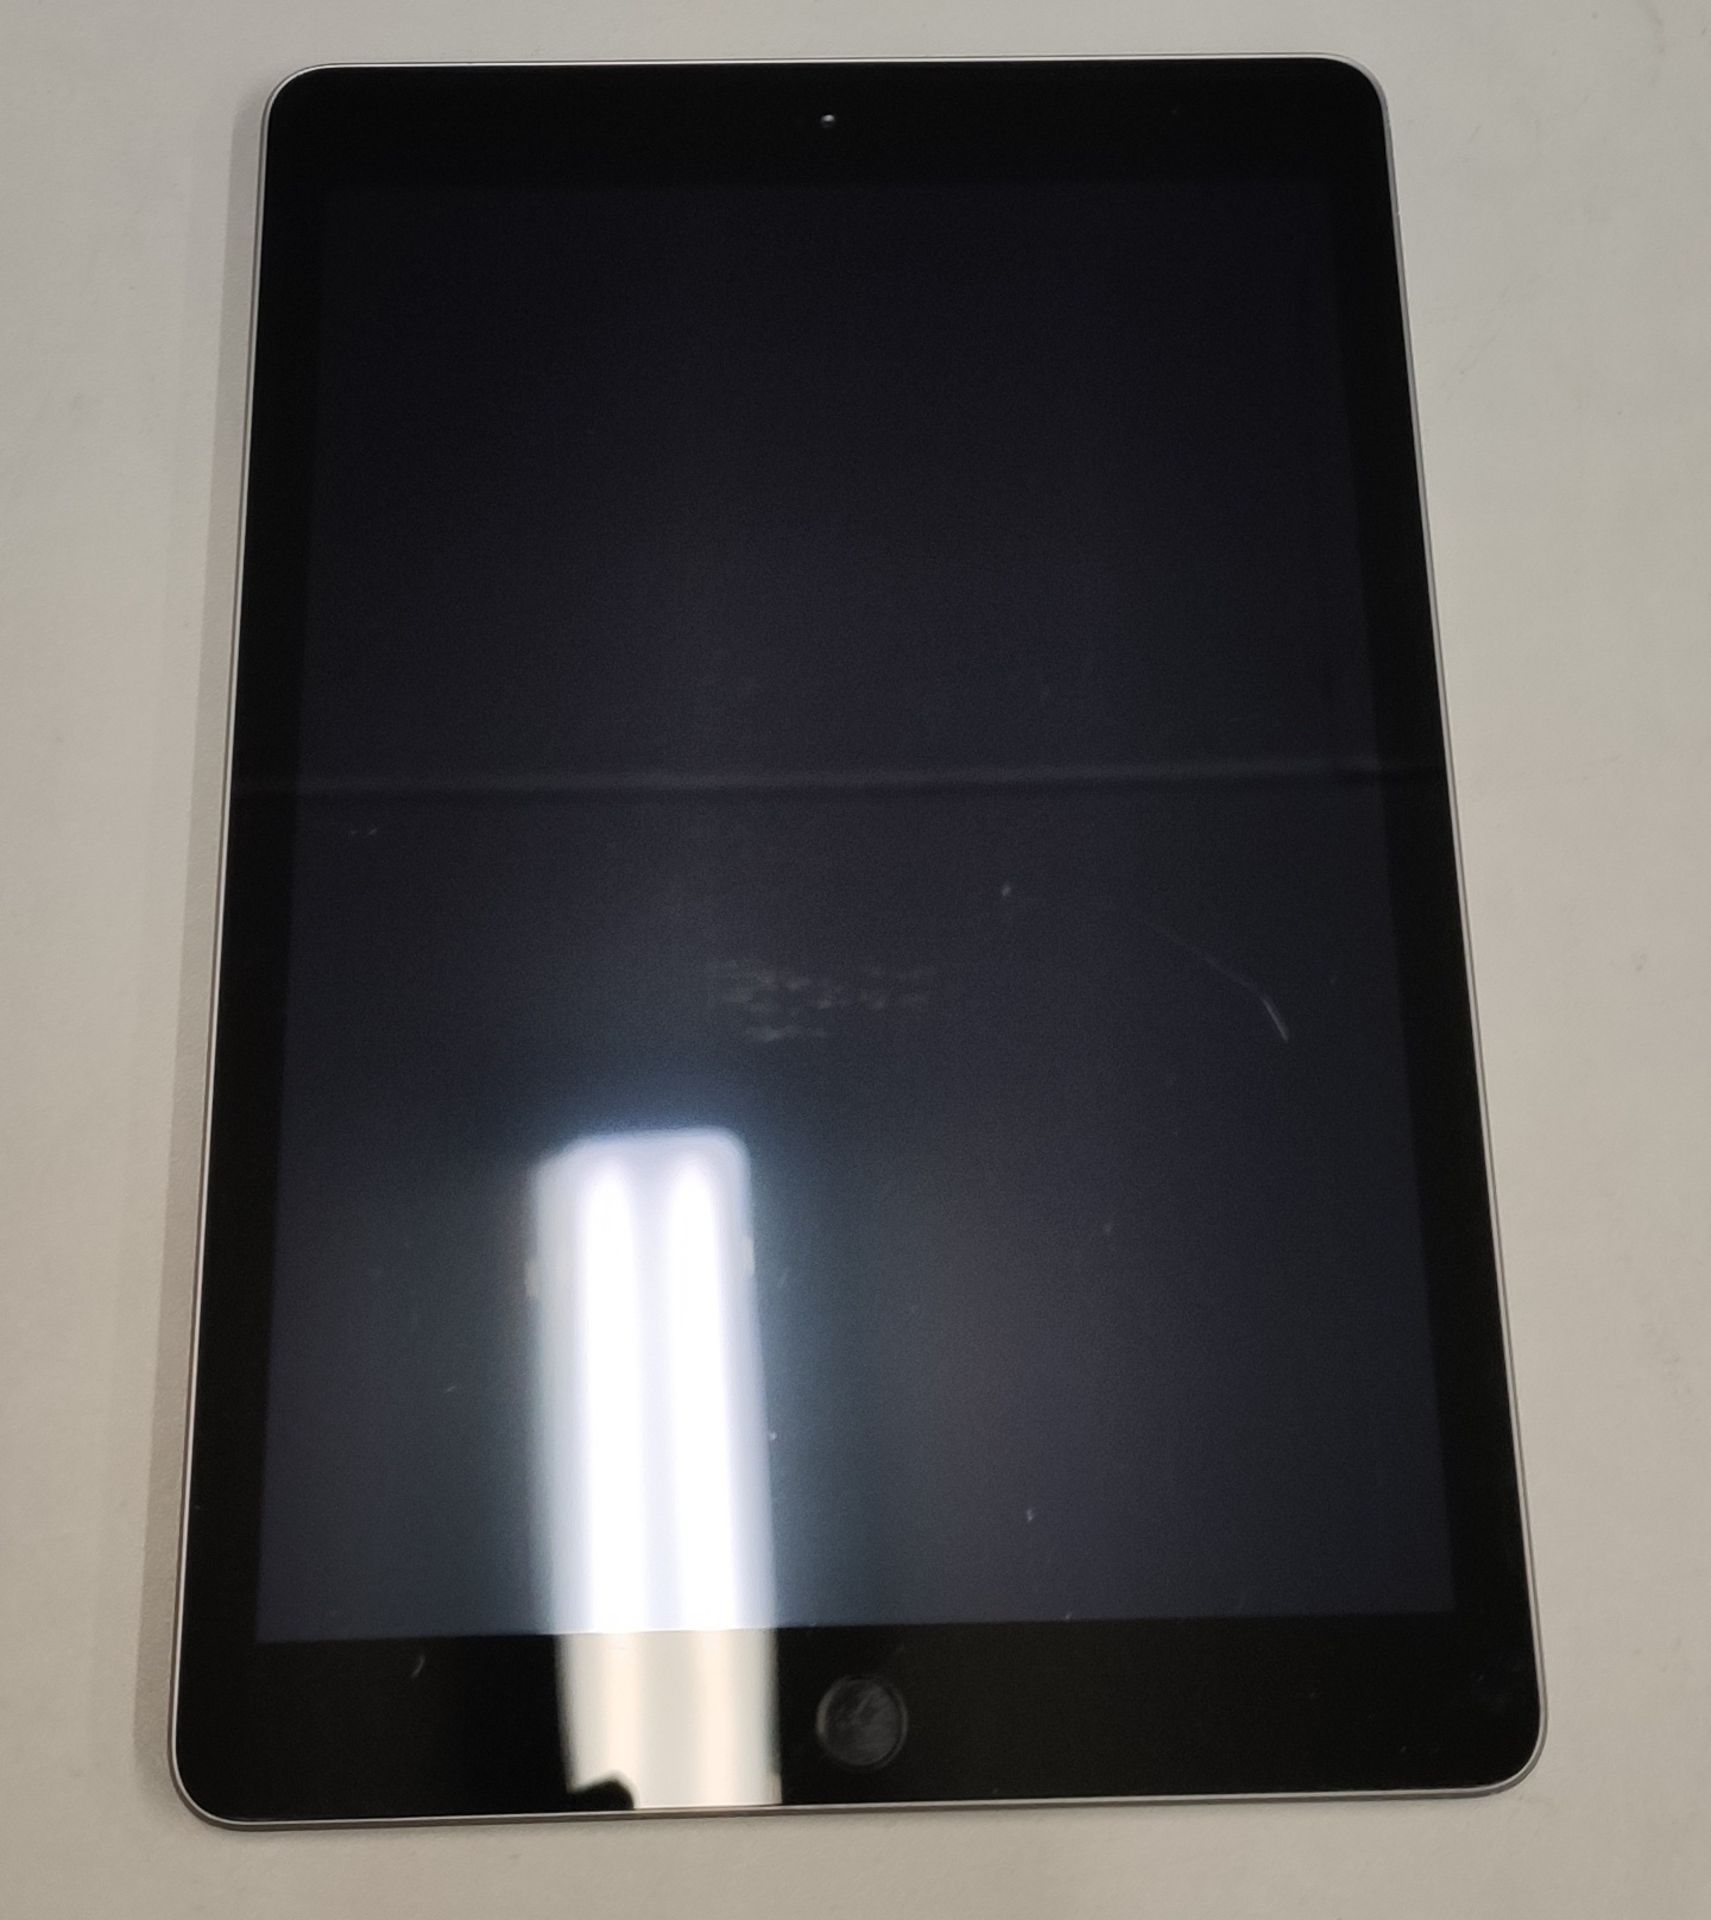 A pre-owned Apple iPad 9.7" 6th Gen (Wi-Fi/Cellular) 32GB in Space Grey (IMEI: 354880092221610) (